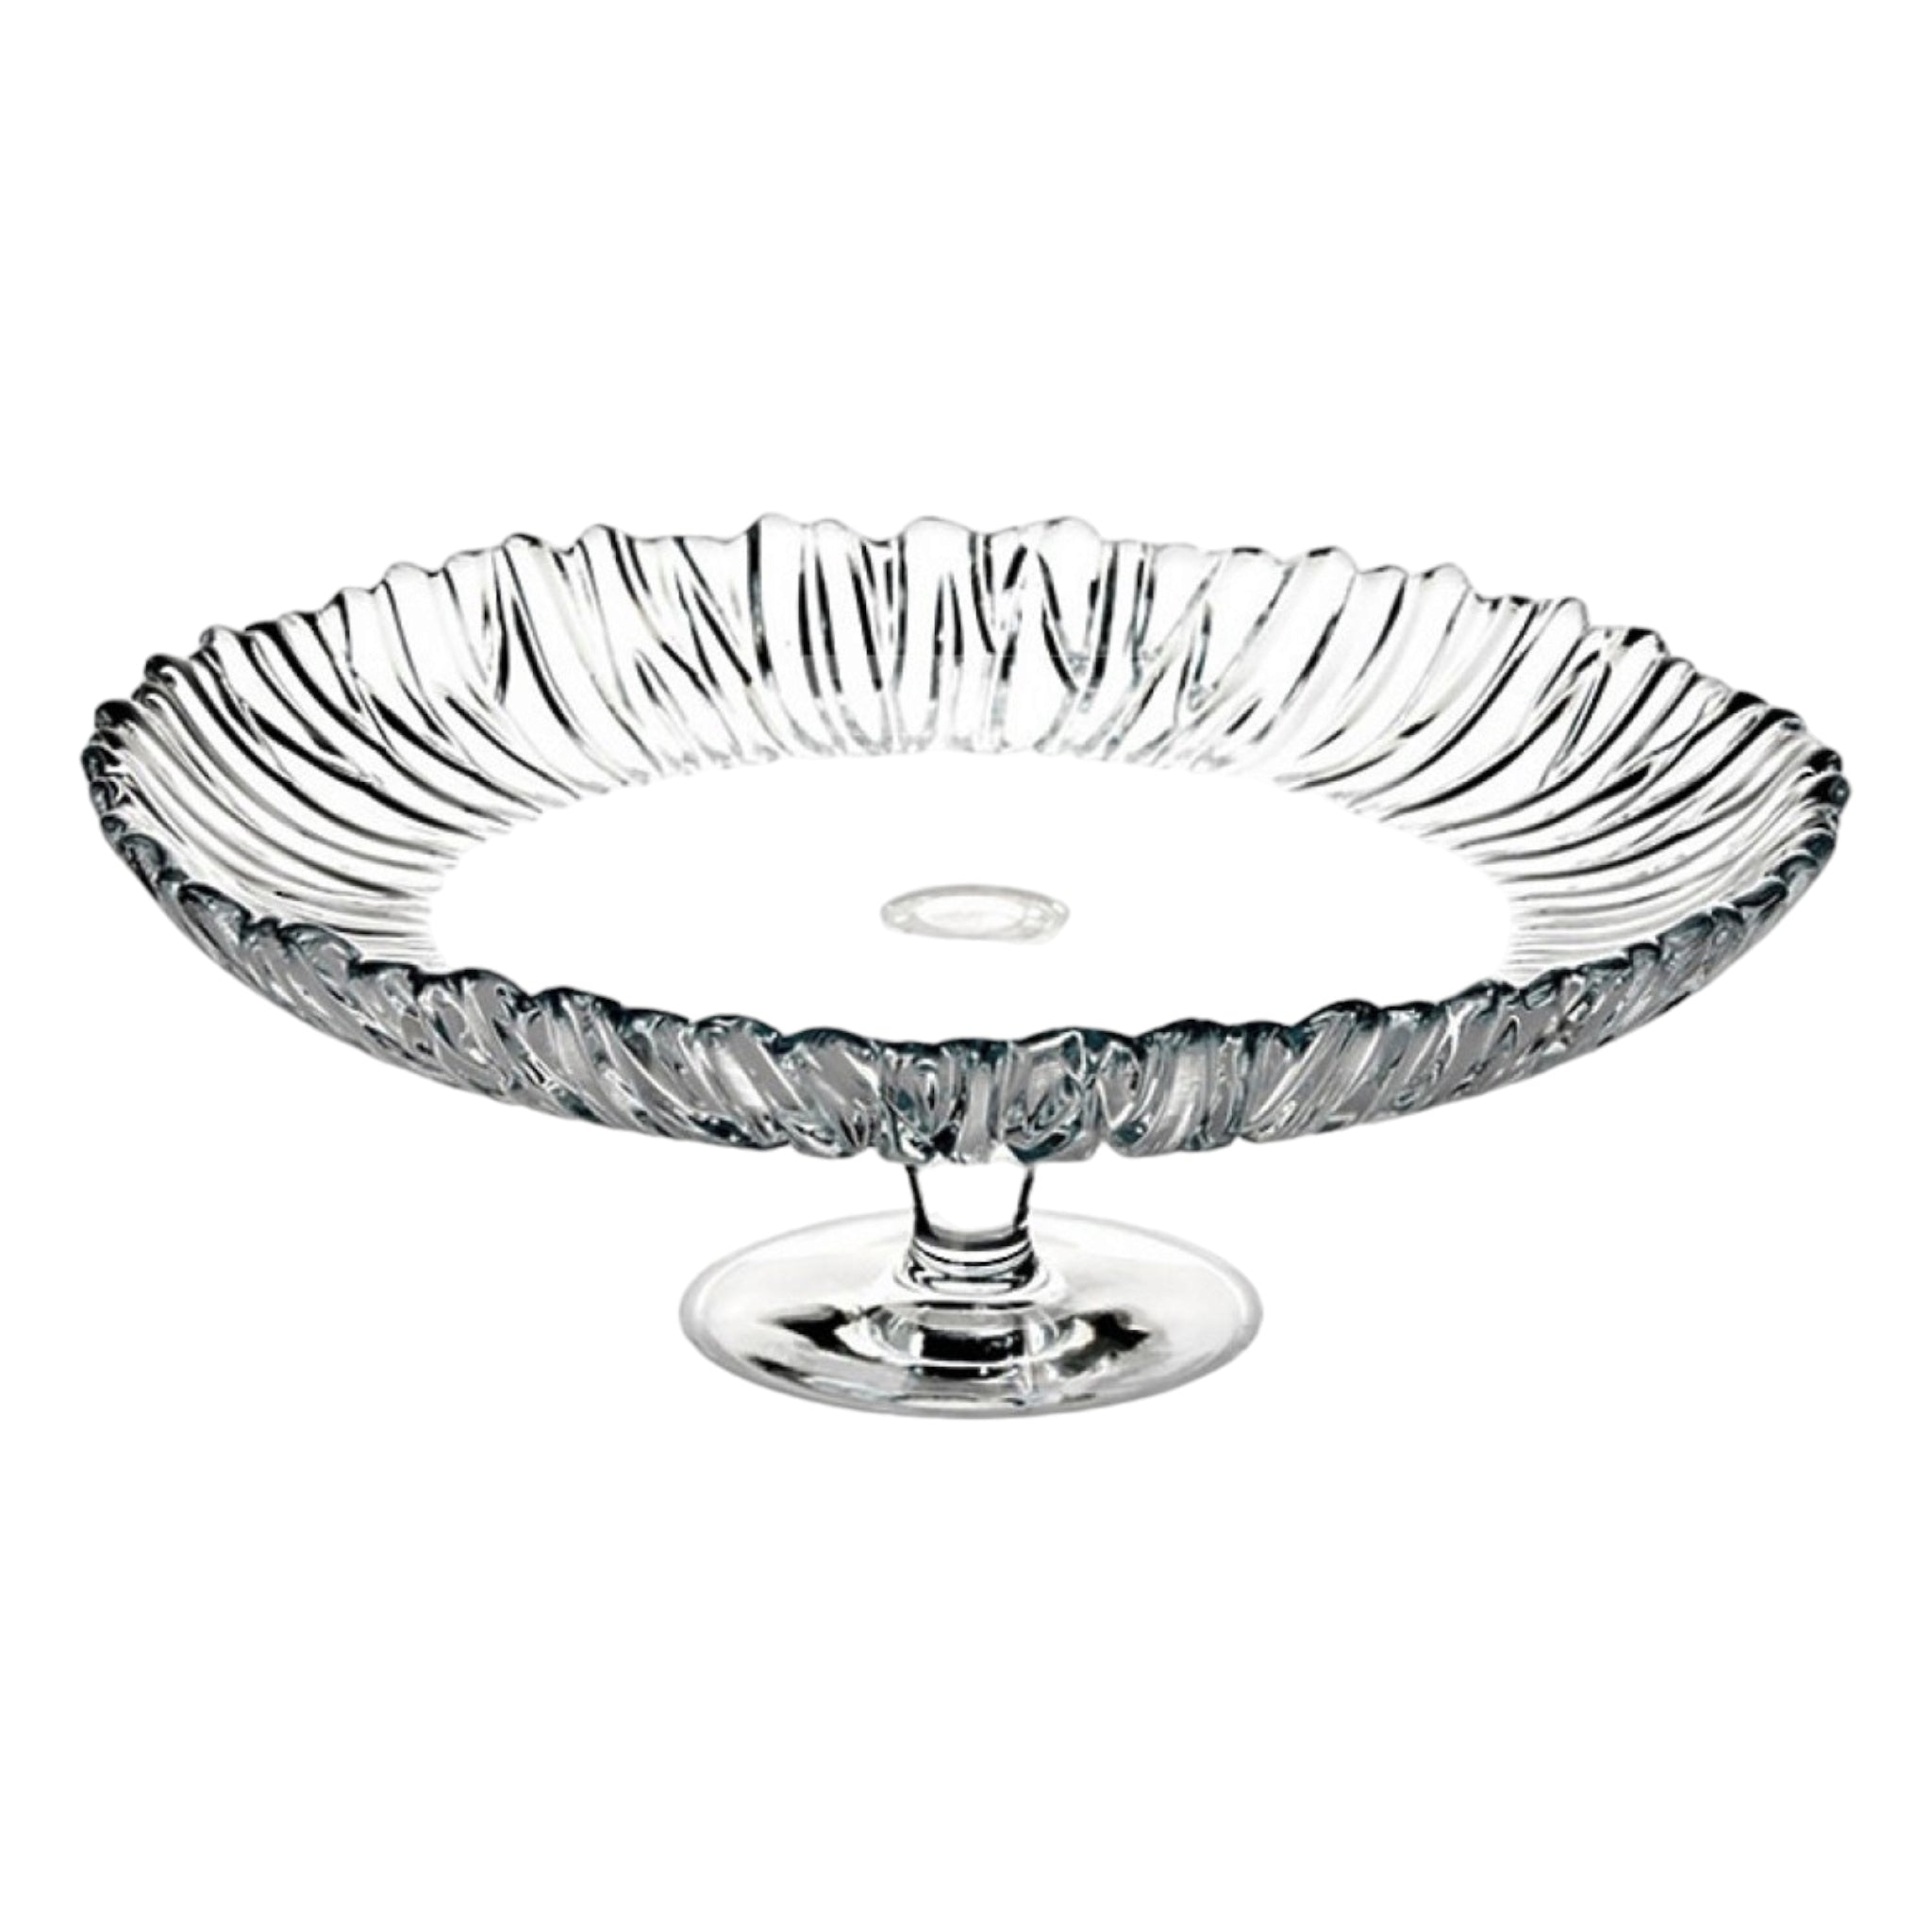 Pasabahce Aurora Footed Serving Plate 205mm